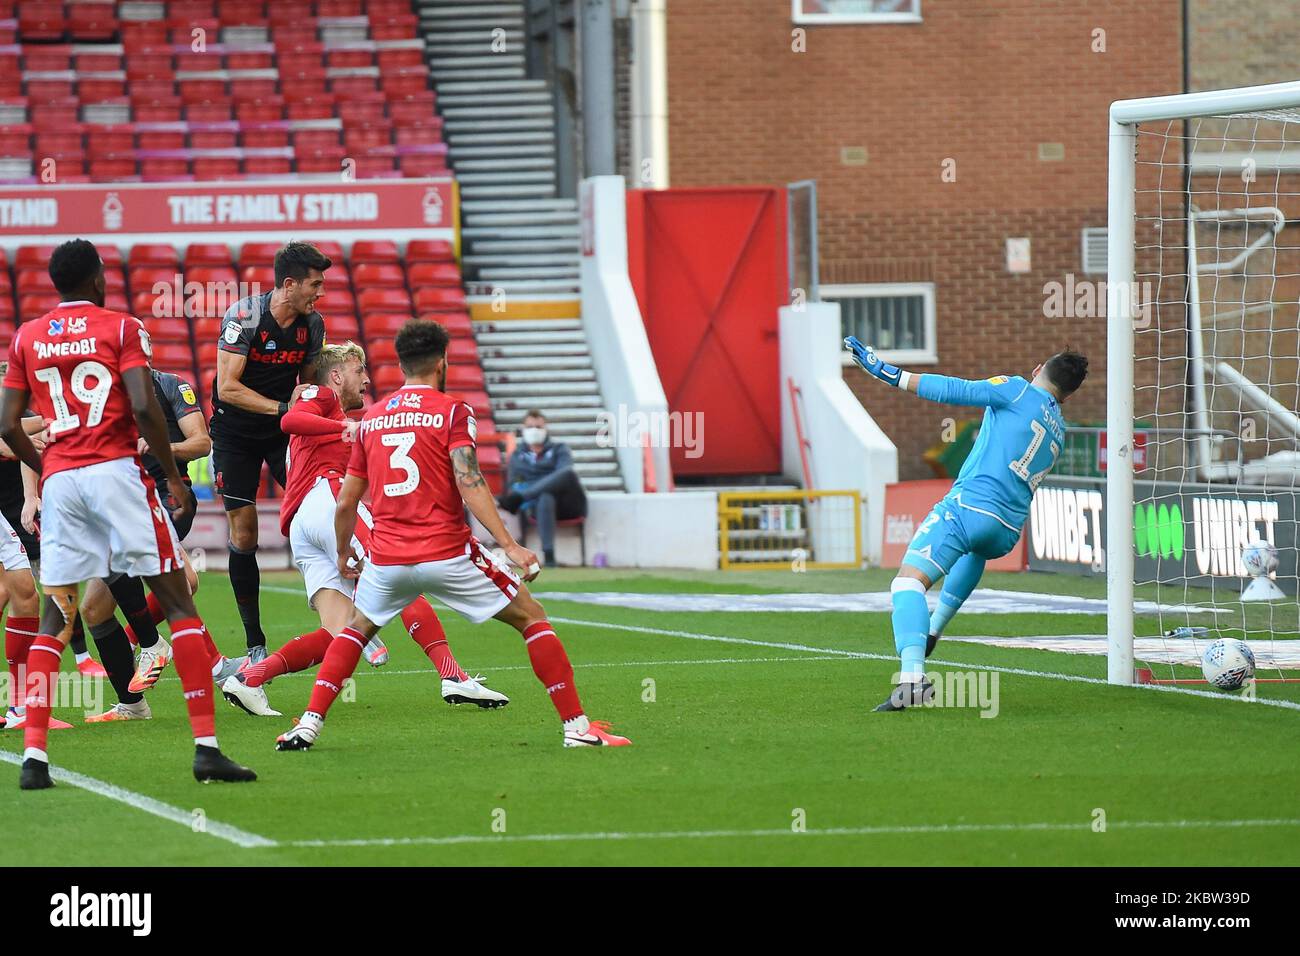 Jordan Smith (12) of Nottingham Forest dives as Danny Batth (6) of Stoke City scores to make it 0-1 during the Sky Bet Championship match between Nottingham Forest and Stoke City at the City Ground, Nottingham. (Photo by Jon Hobley/MI News/NurPhoto) Stock Photo